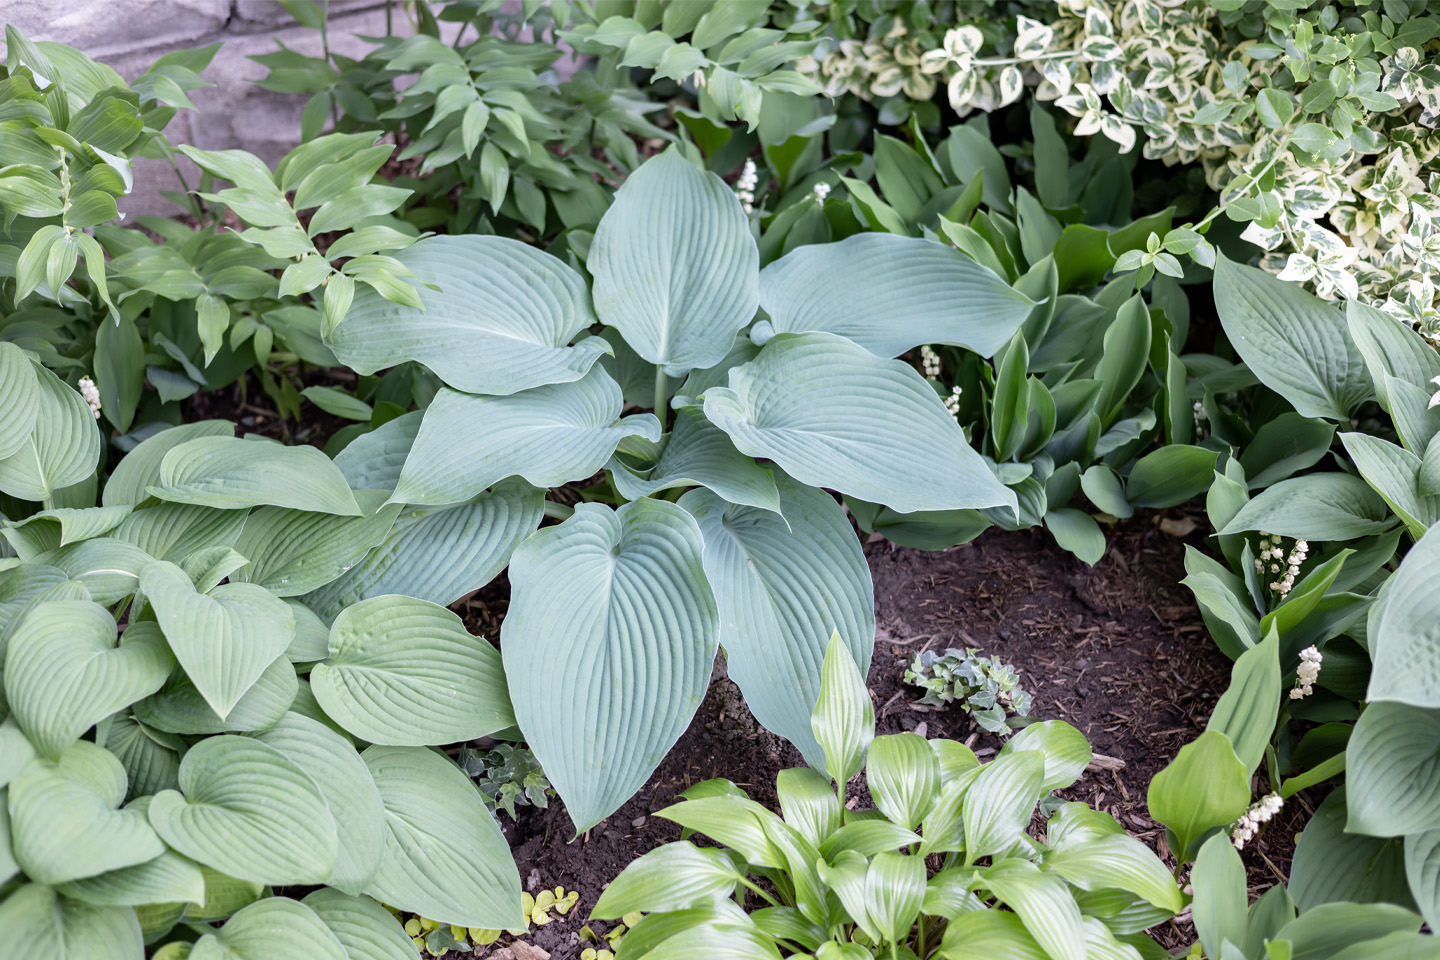 Solomon's seal paired with various hostas, ivy, and lily of the valley.